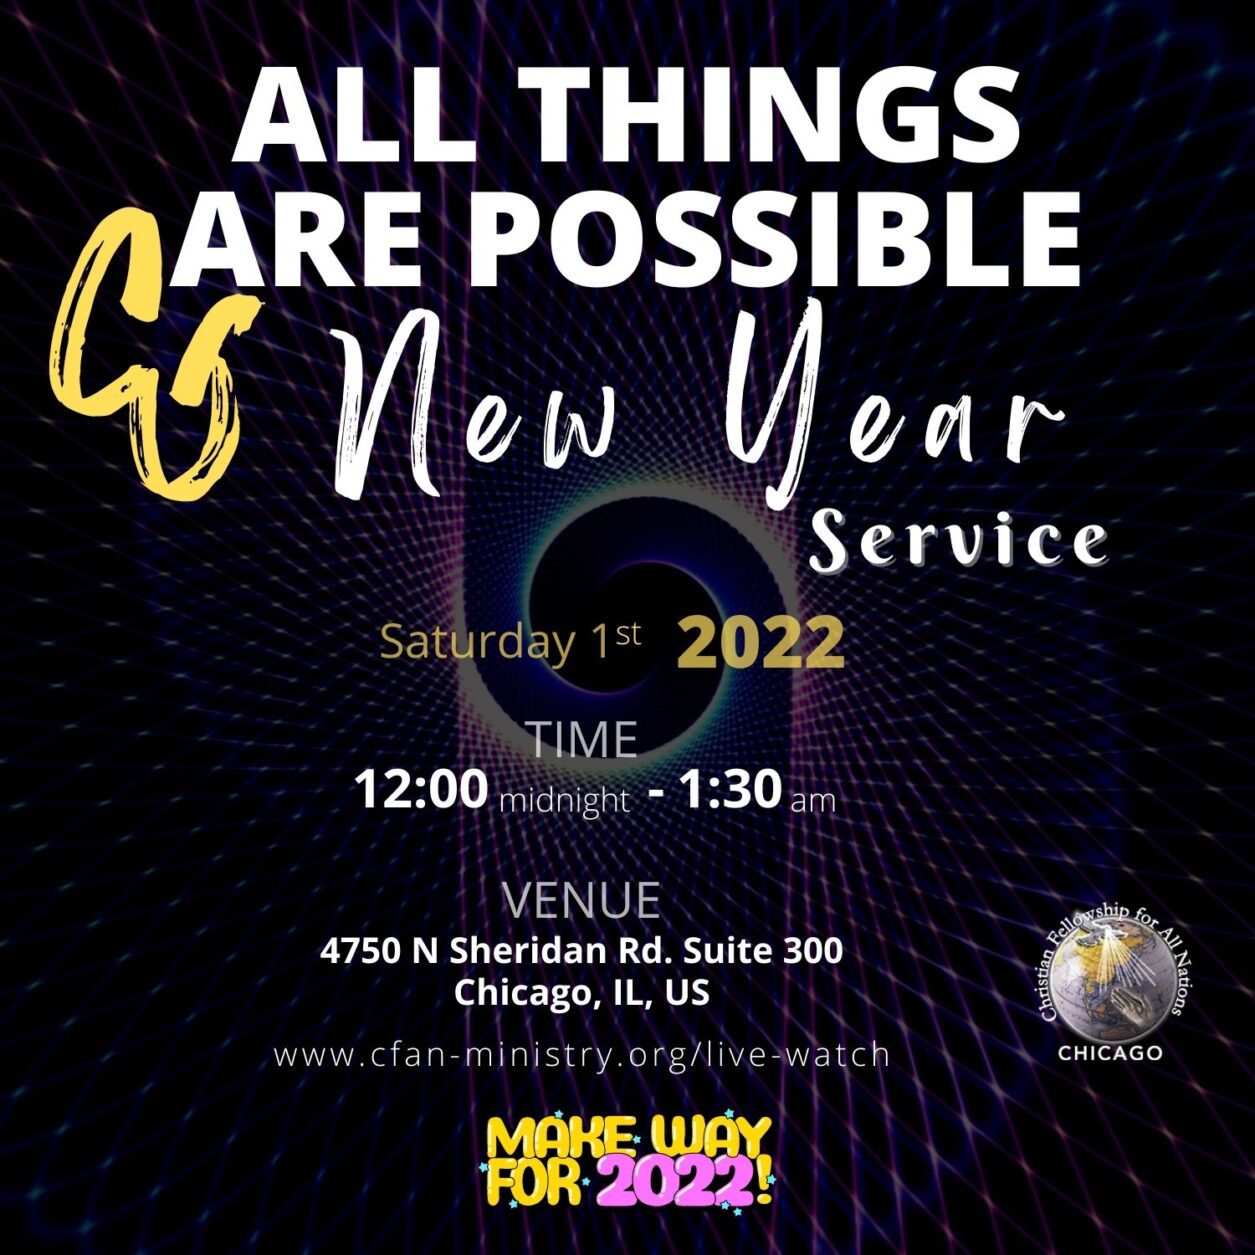 ATAP and New Year Service